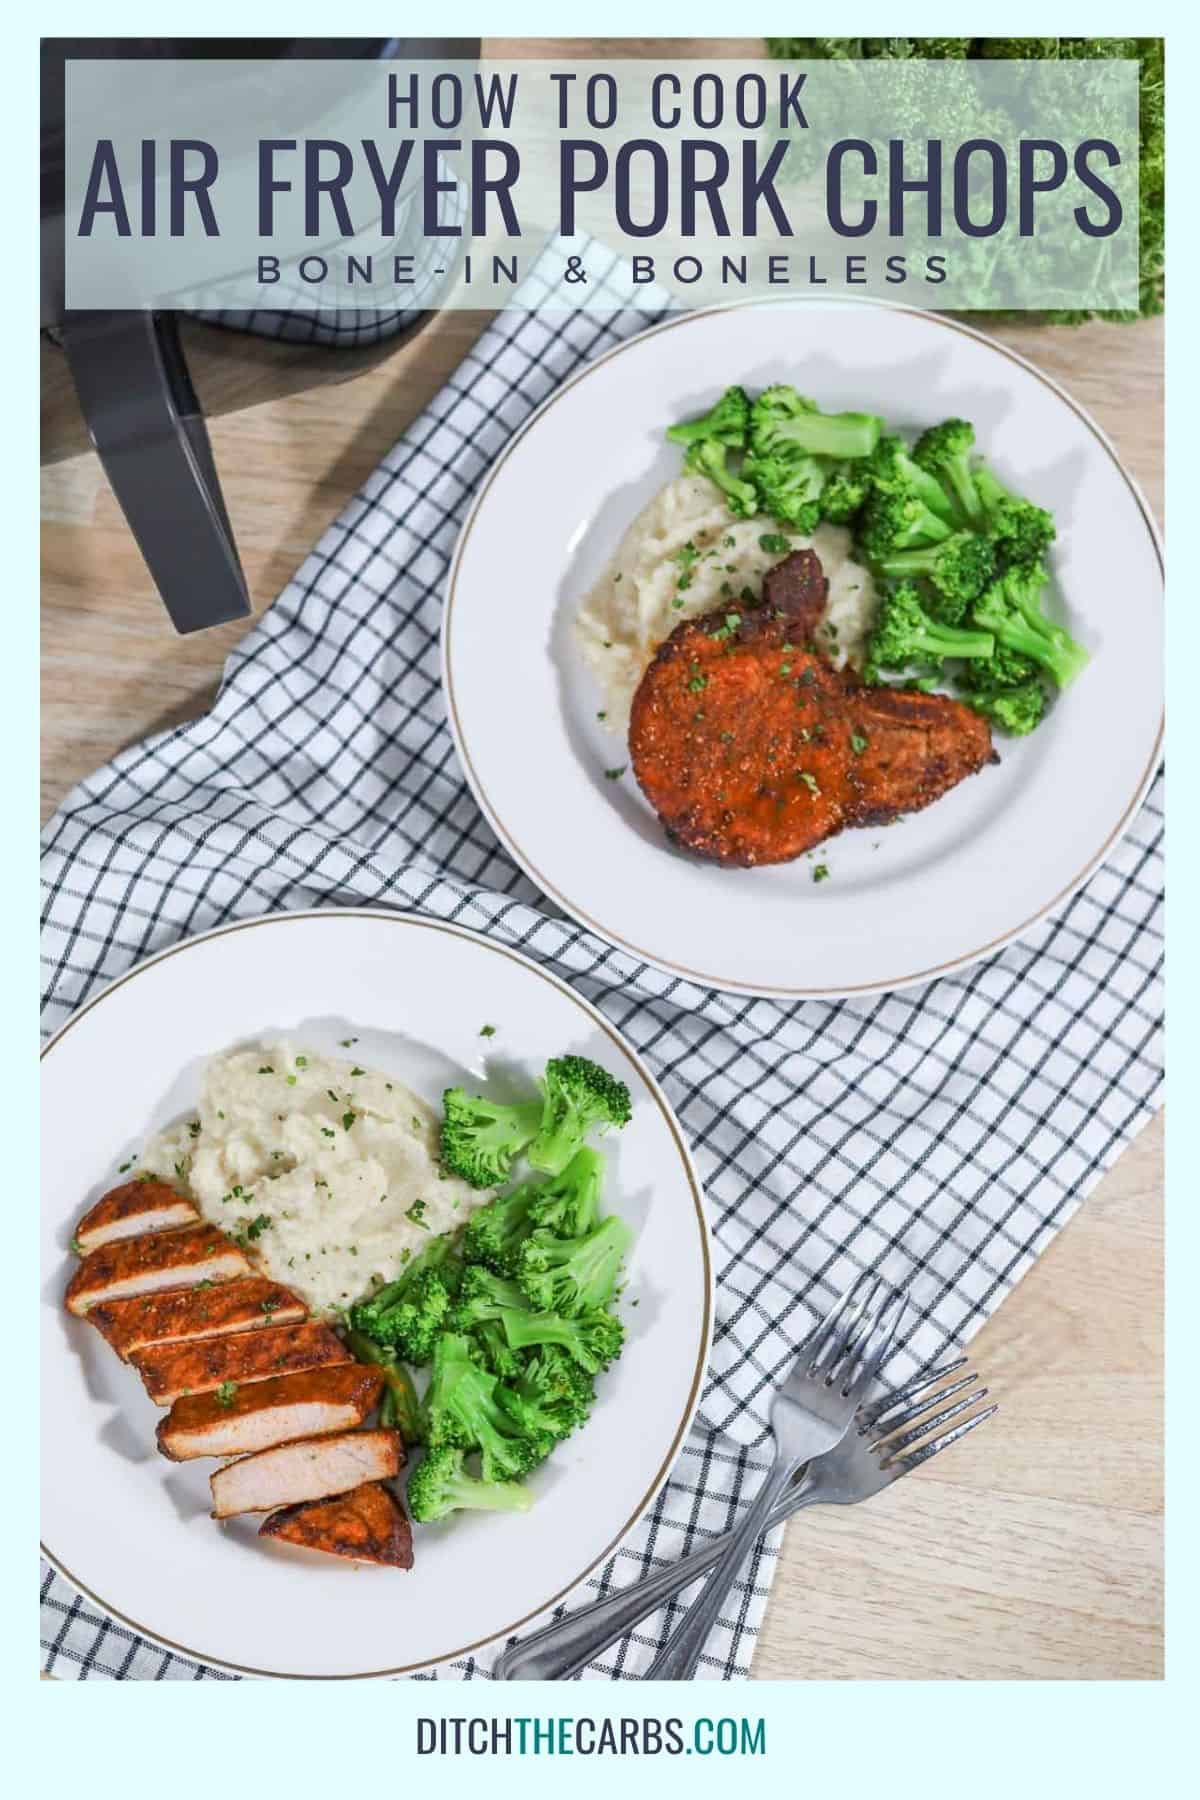 2 plates of pork chops with mashed cauliflower and broccoli